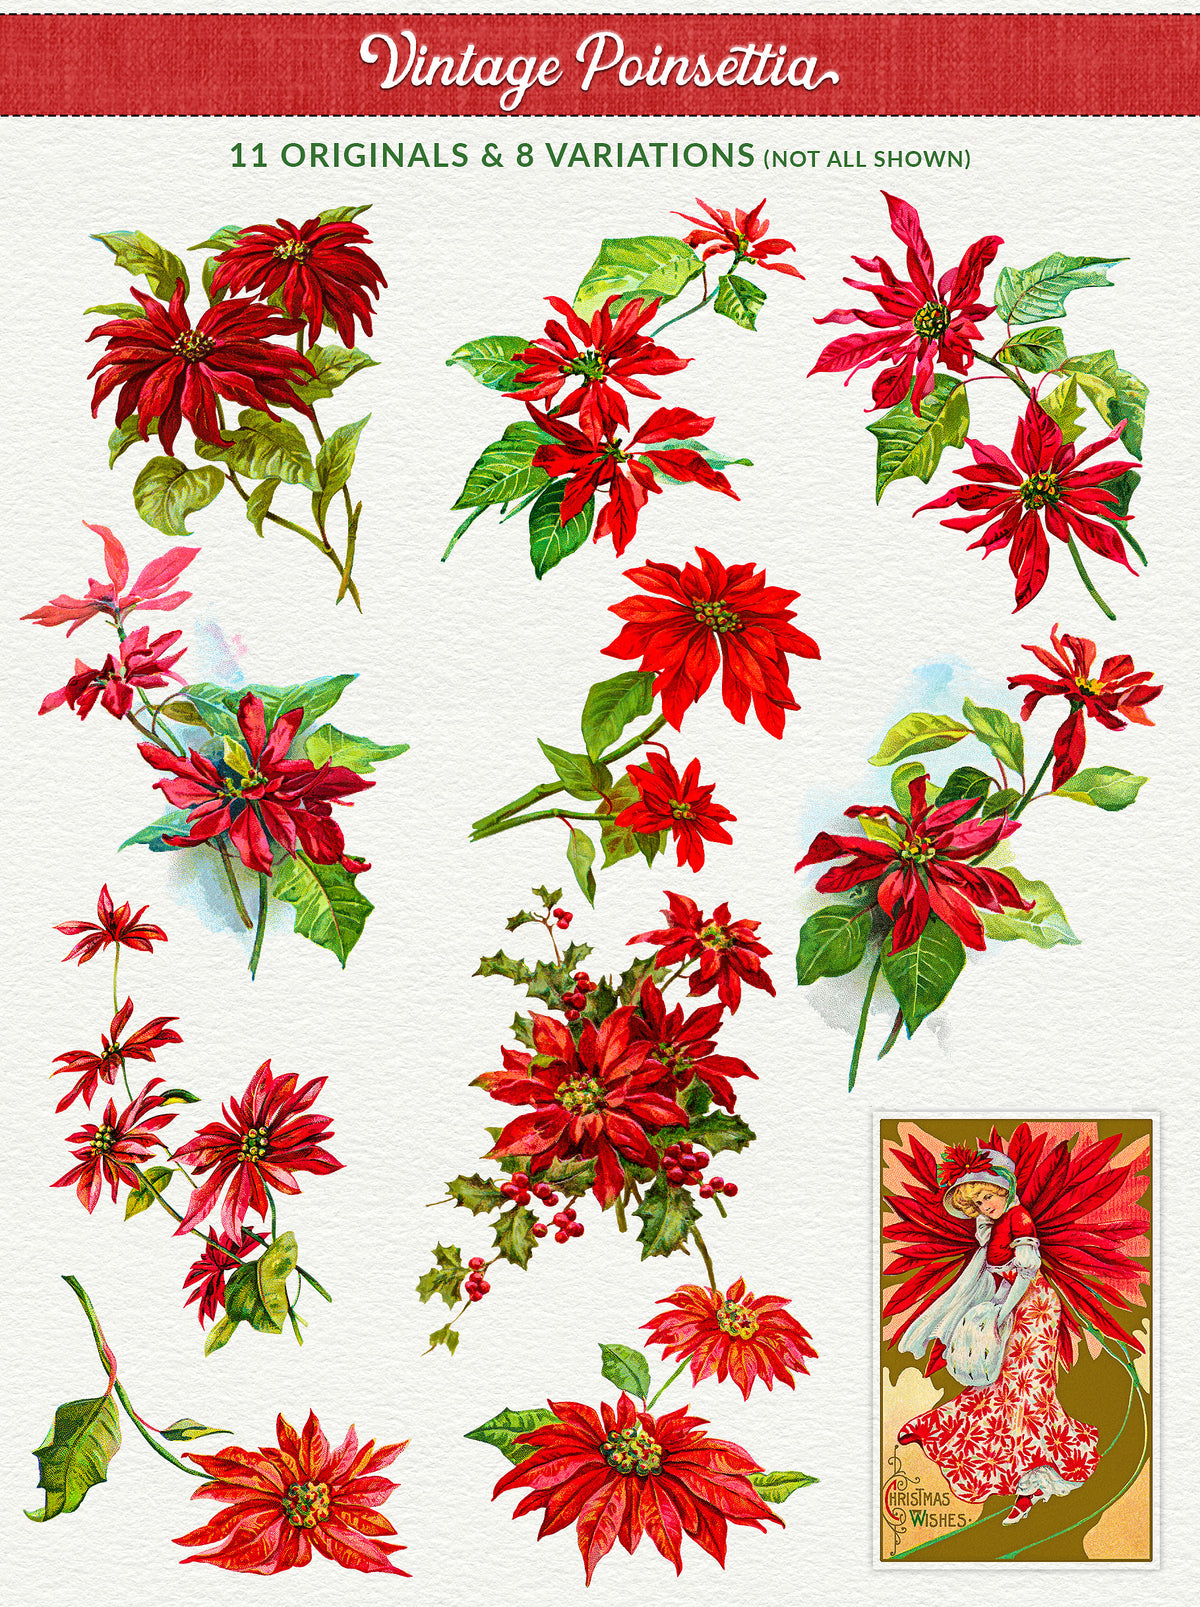 Vintage illustration graphics of poinsettia from the Vintage Christmas Illustrations Compendium extended license graphics collection.